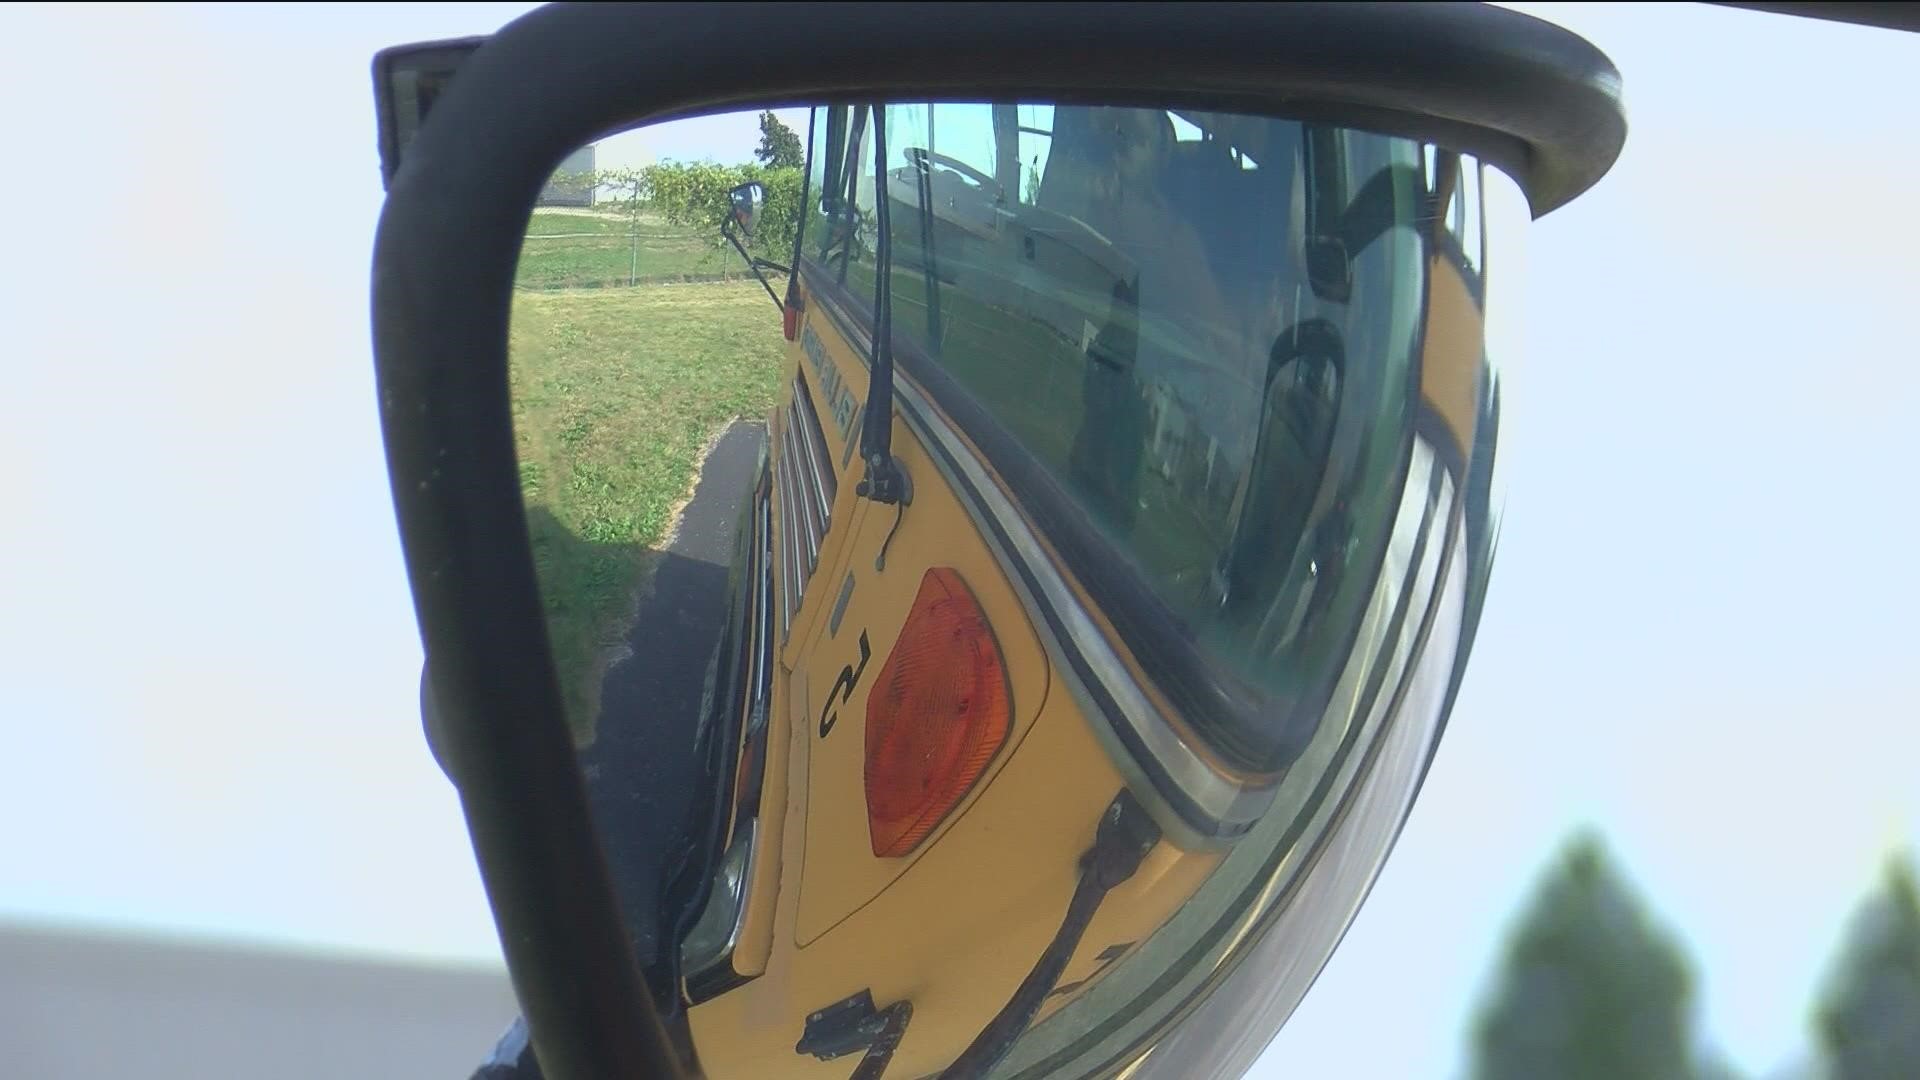 Many school districts cut school bus routes amid shortages. Bus drivers are required to receive a CDL and other trainings to qualify.